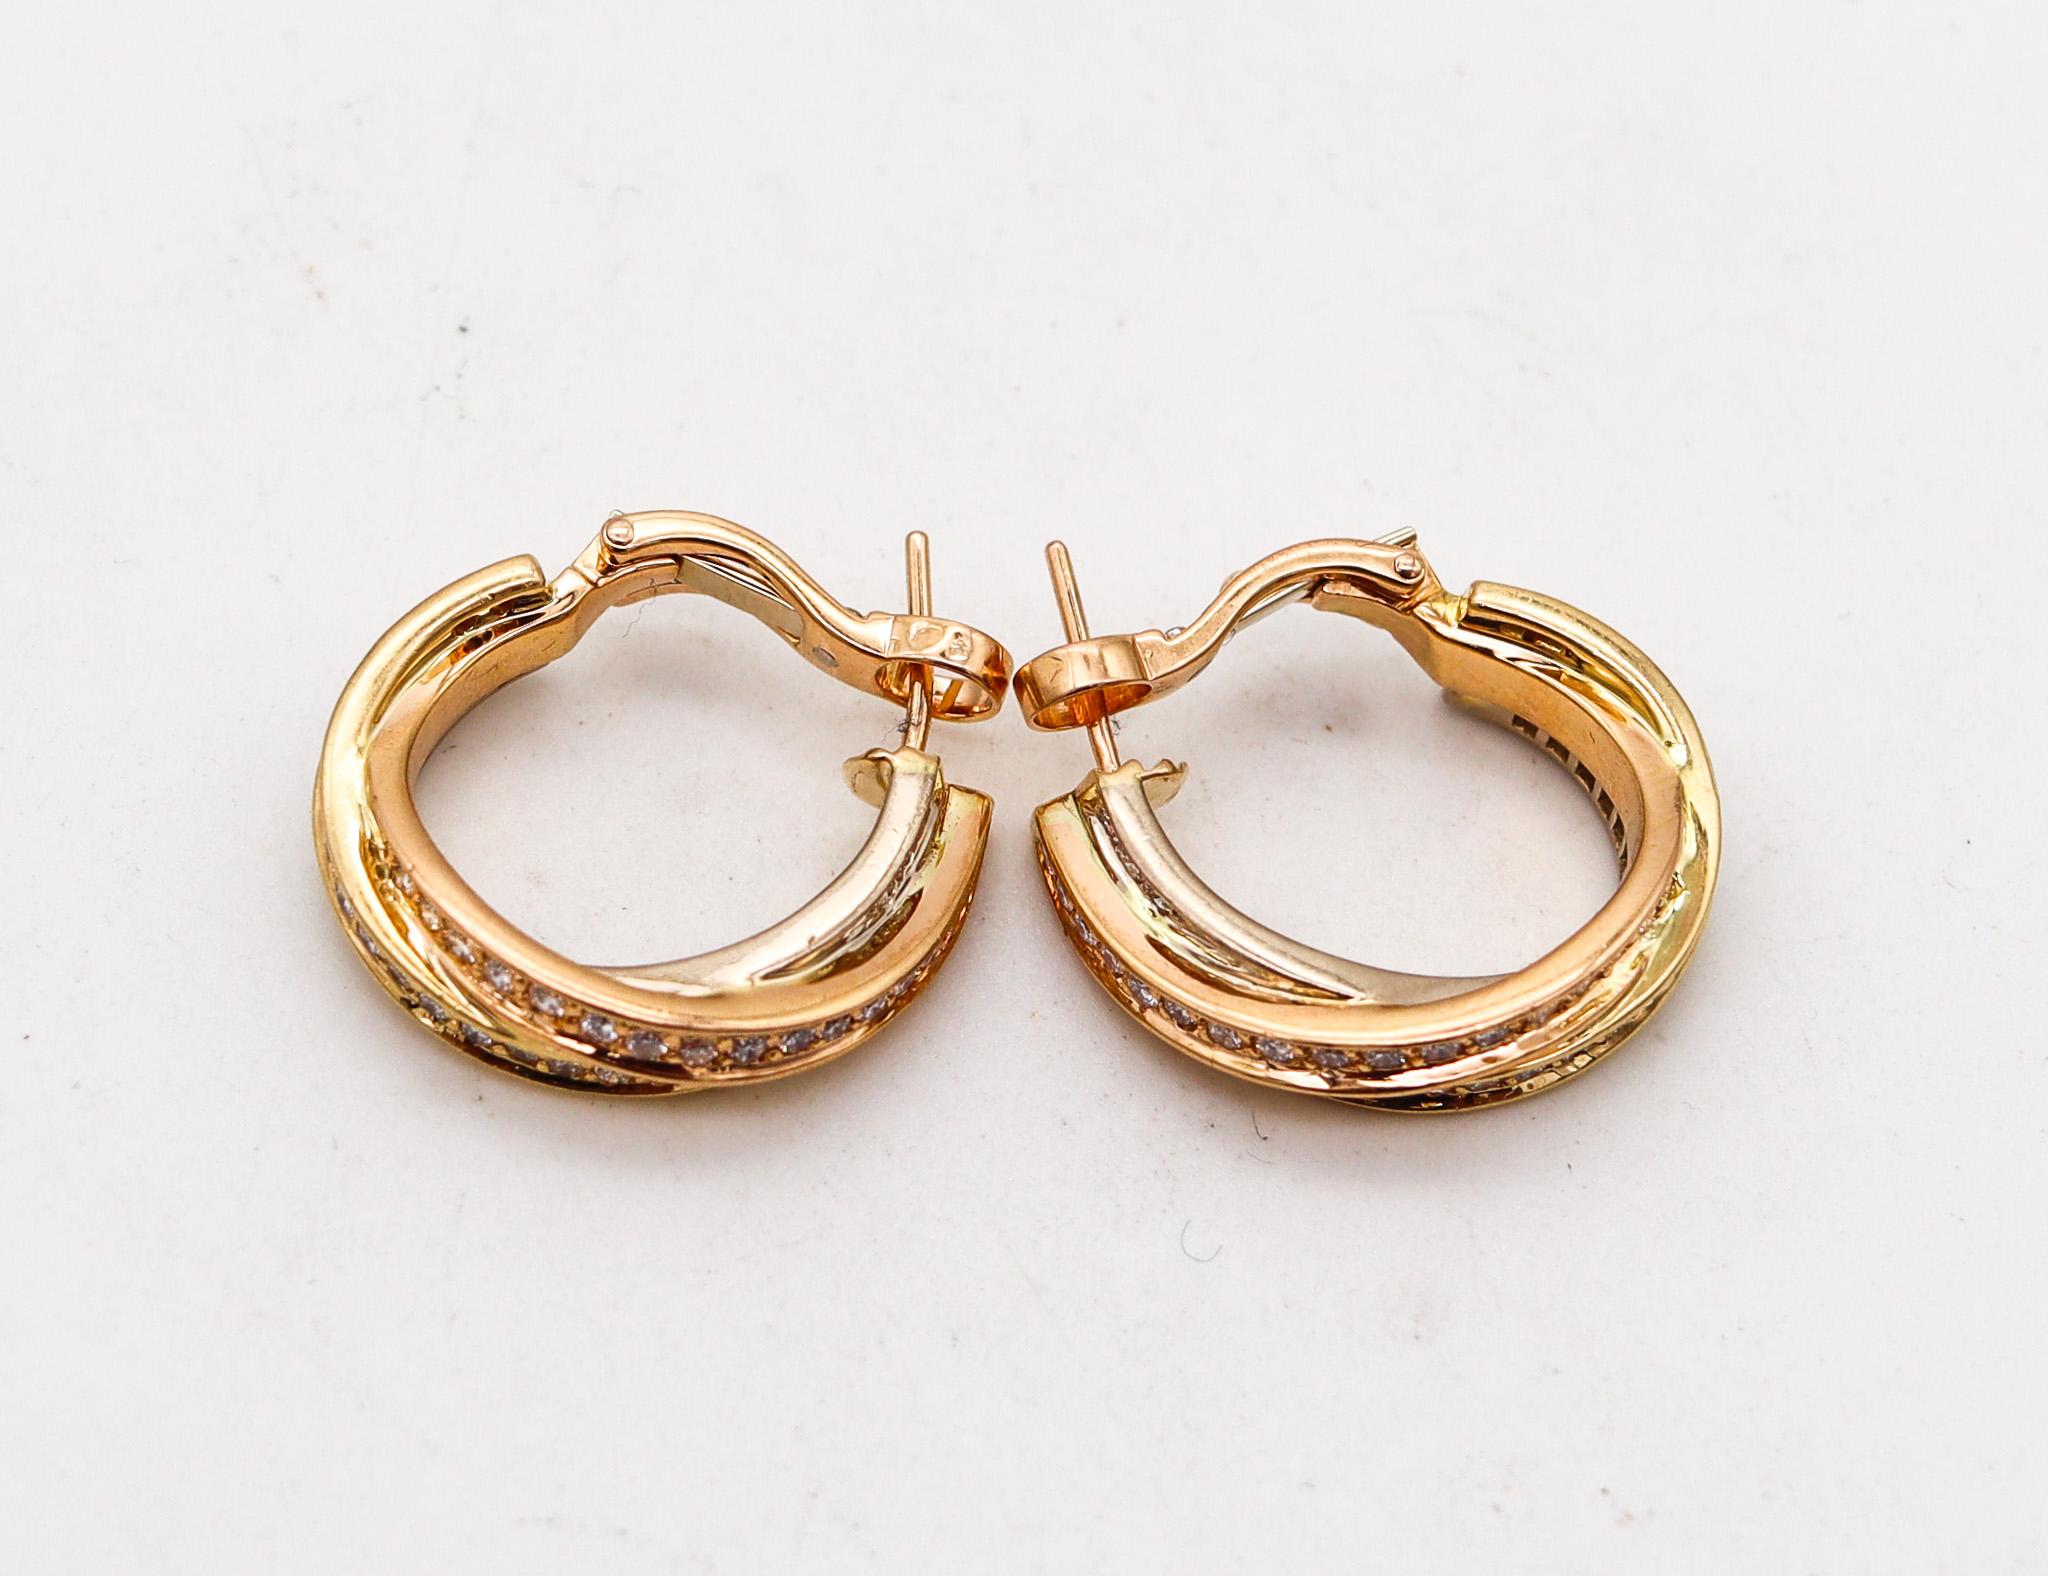 Brilliant Cut Cartier Paris Trinity Earrings In 18Kt Yellow Gold With 2.07 Ctw In Diamonds